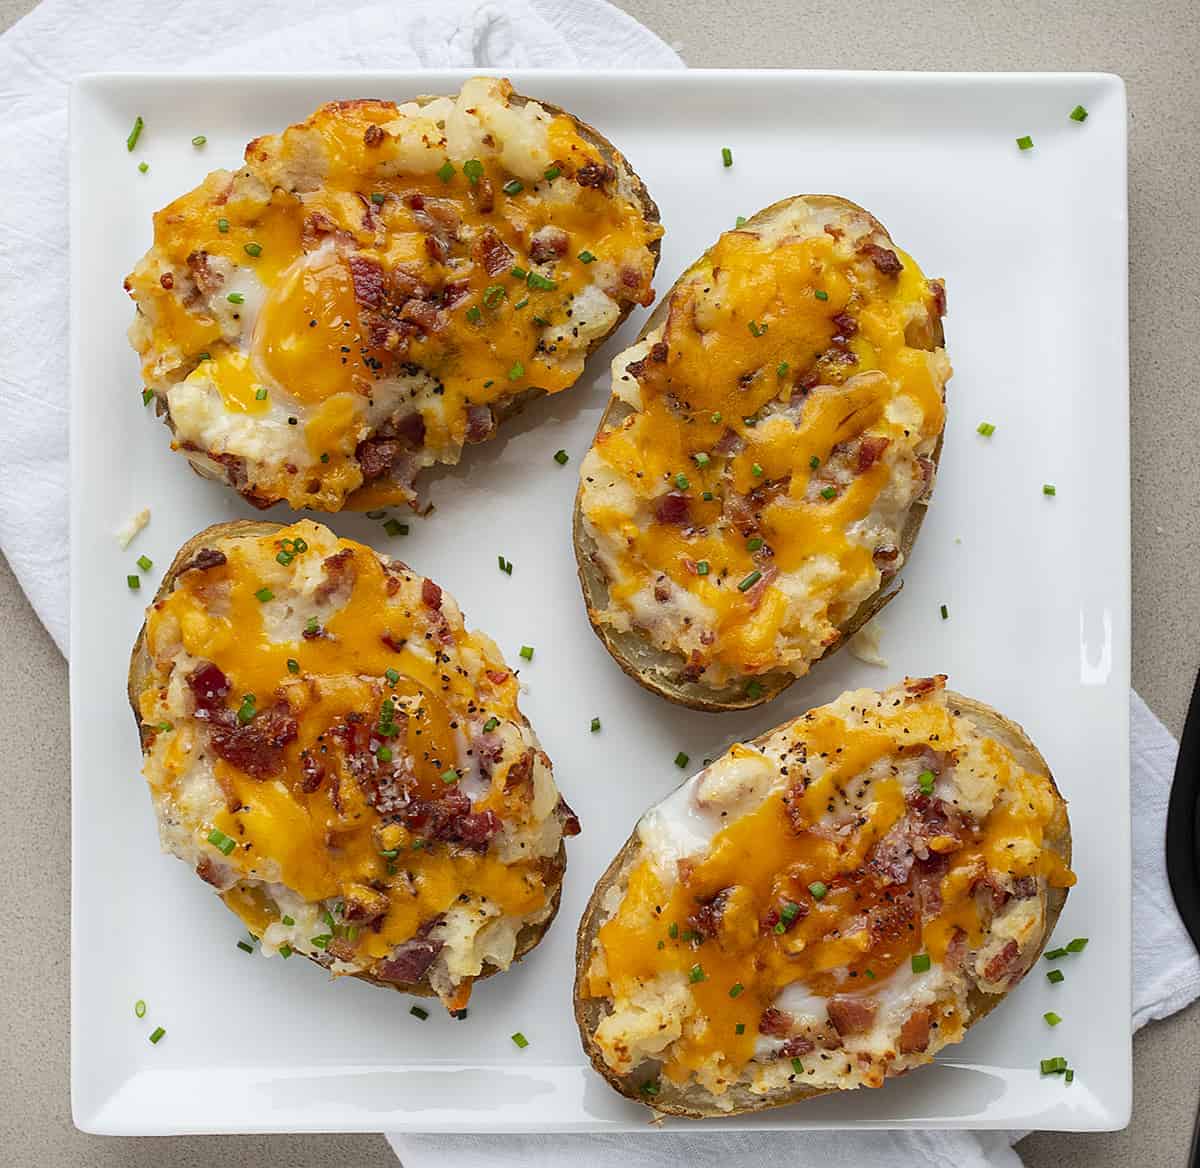 Breakfast Twice Baked Potatoes on a White Plate from Overhead